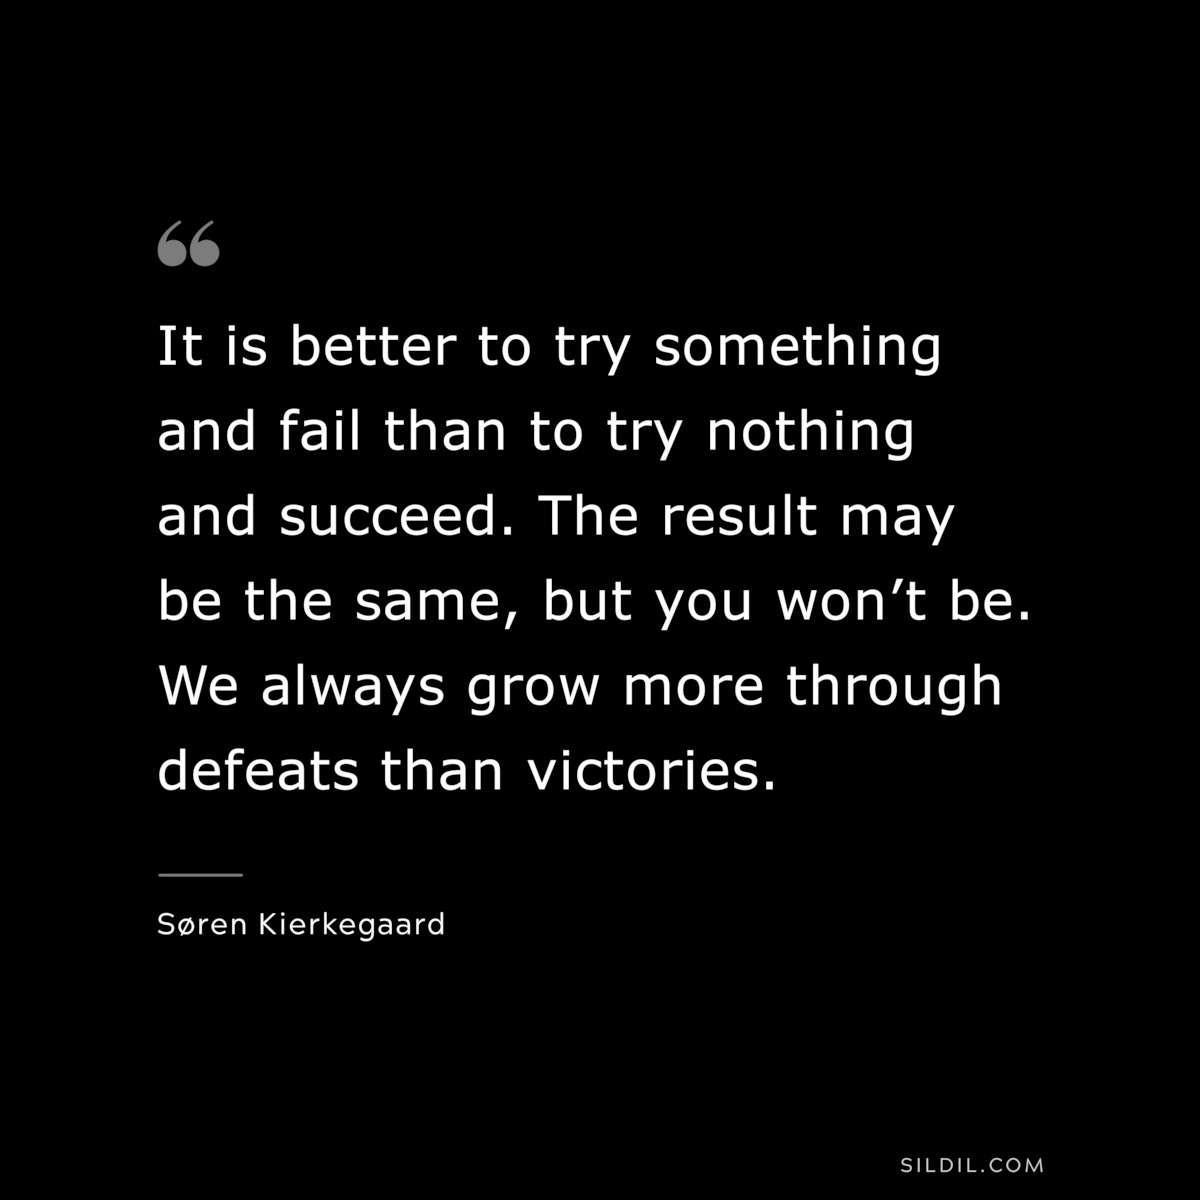 It is better to try something and fail than to try nothing and succeed. The result may be the same, but you won’t be. We always grow more through defeats than victories. ― Søren Kierkegaard